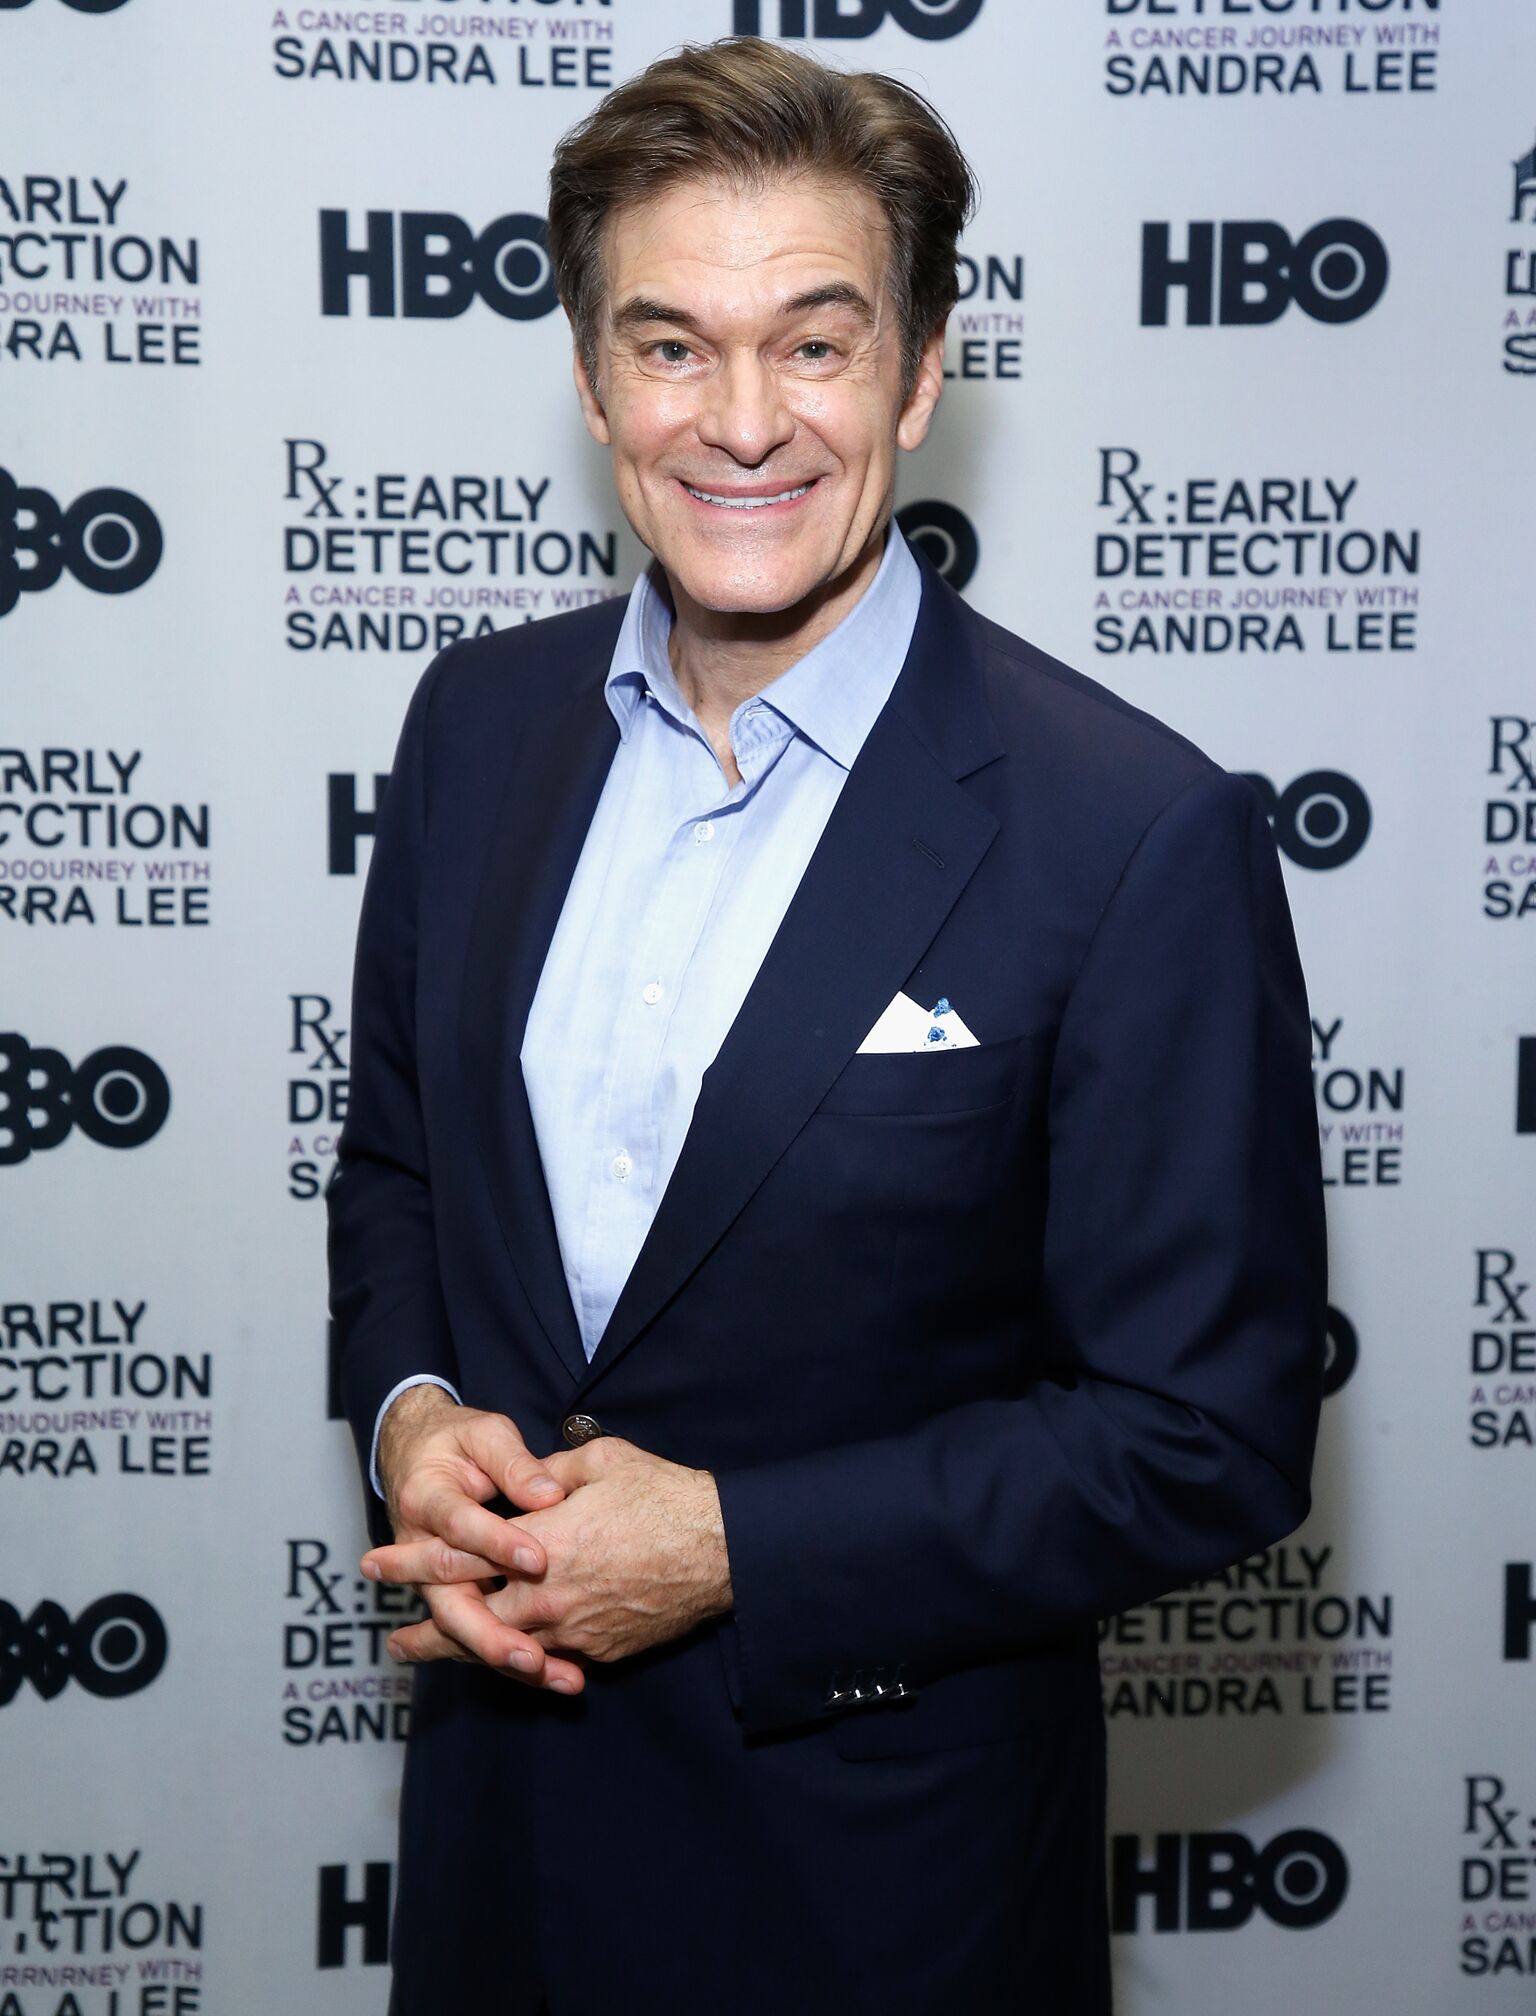 Dr. Mehmet Oz attends "RX: Early Detection A Cancer Journey With Sandra Lee" New York screening at HBO Theater | Getty Images